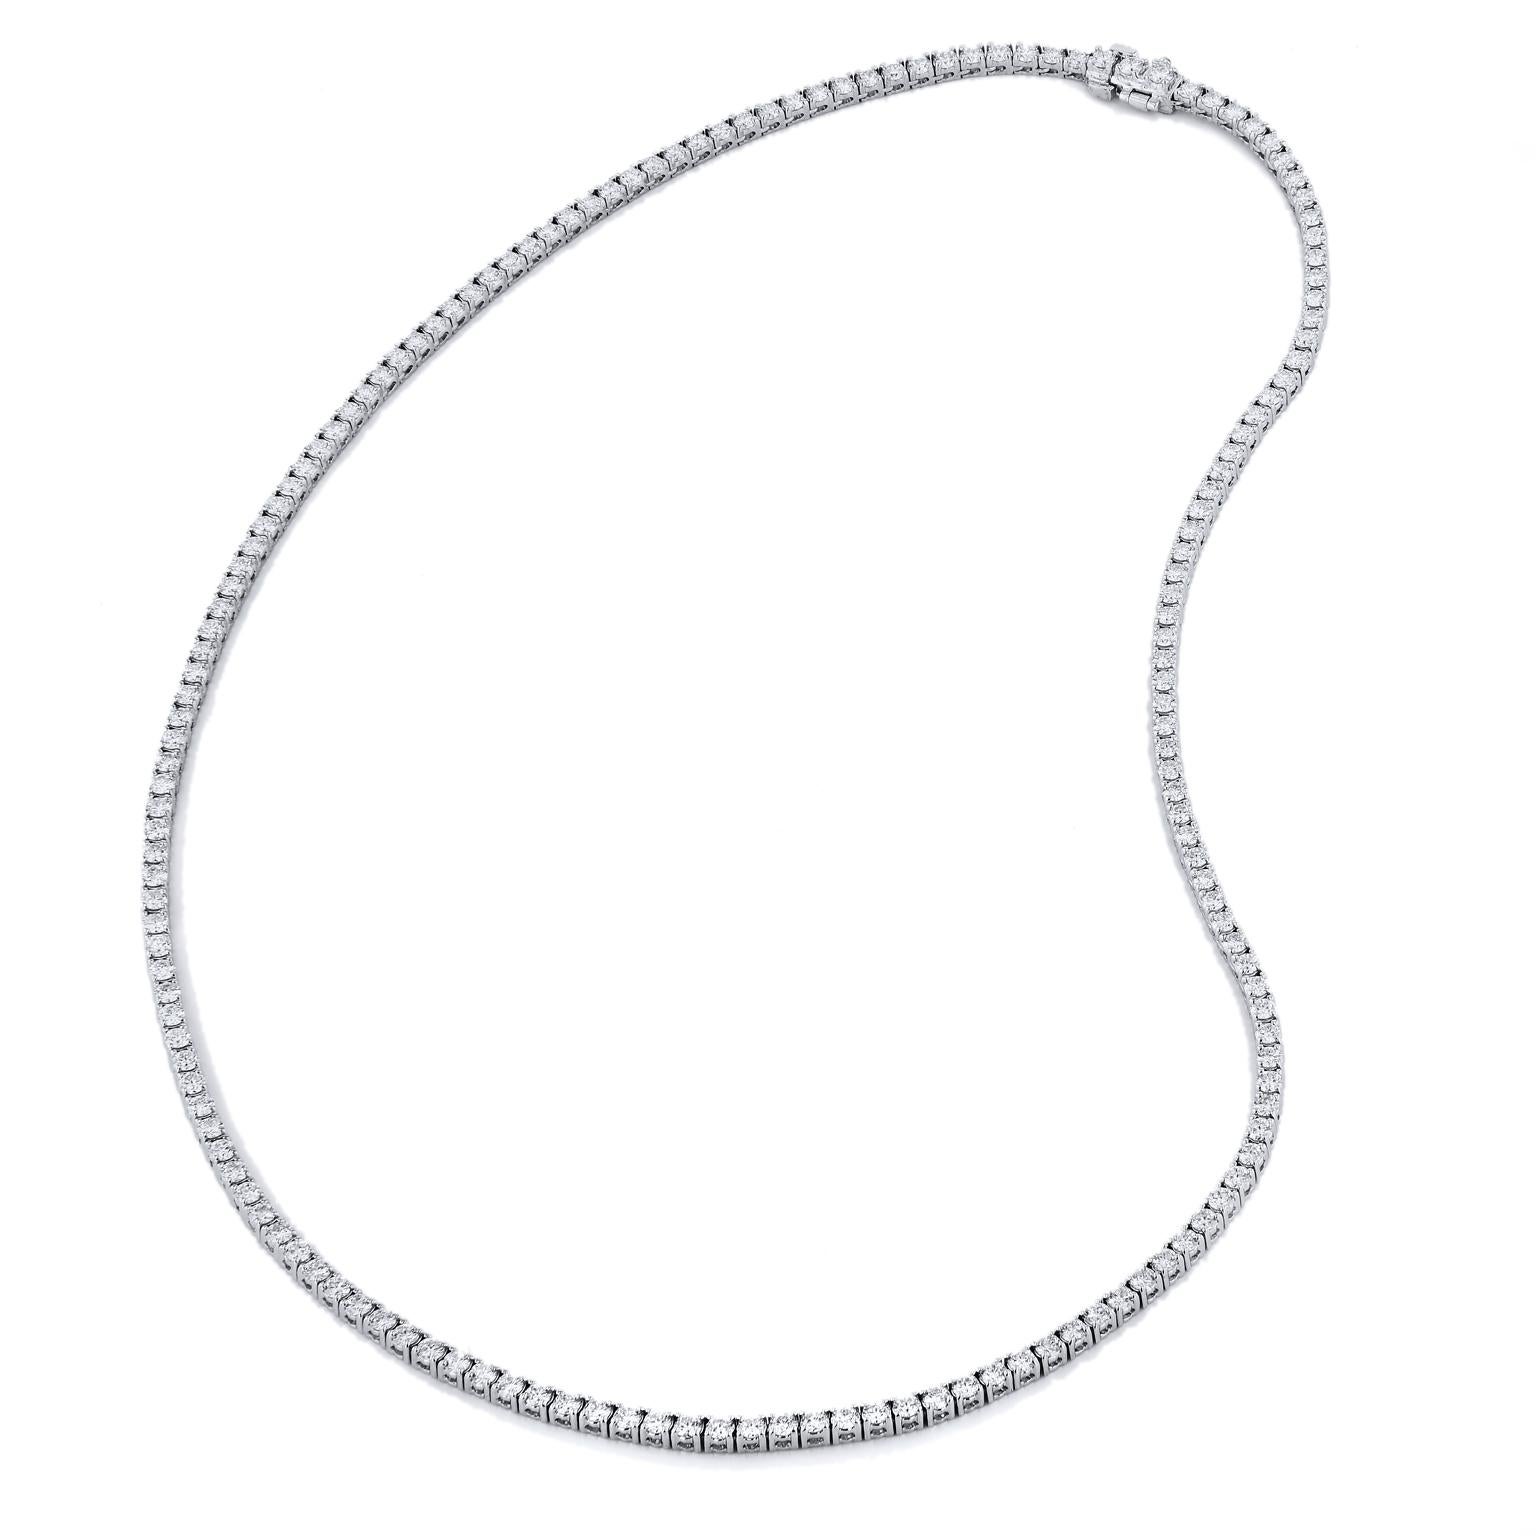 8.27 Carat Diamond Riviera Necklace, set in 18 Karat White Gold 18 Inches Long.

This is handmade and a one of a kind piece. 

You will feel magical in this stunning 18 inch long Riviera necklace will never go out of style, set in 18 karat white